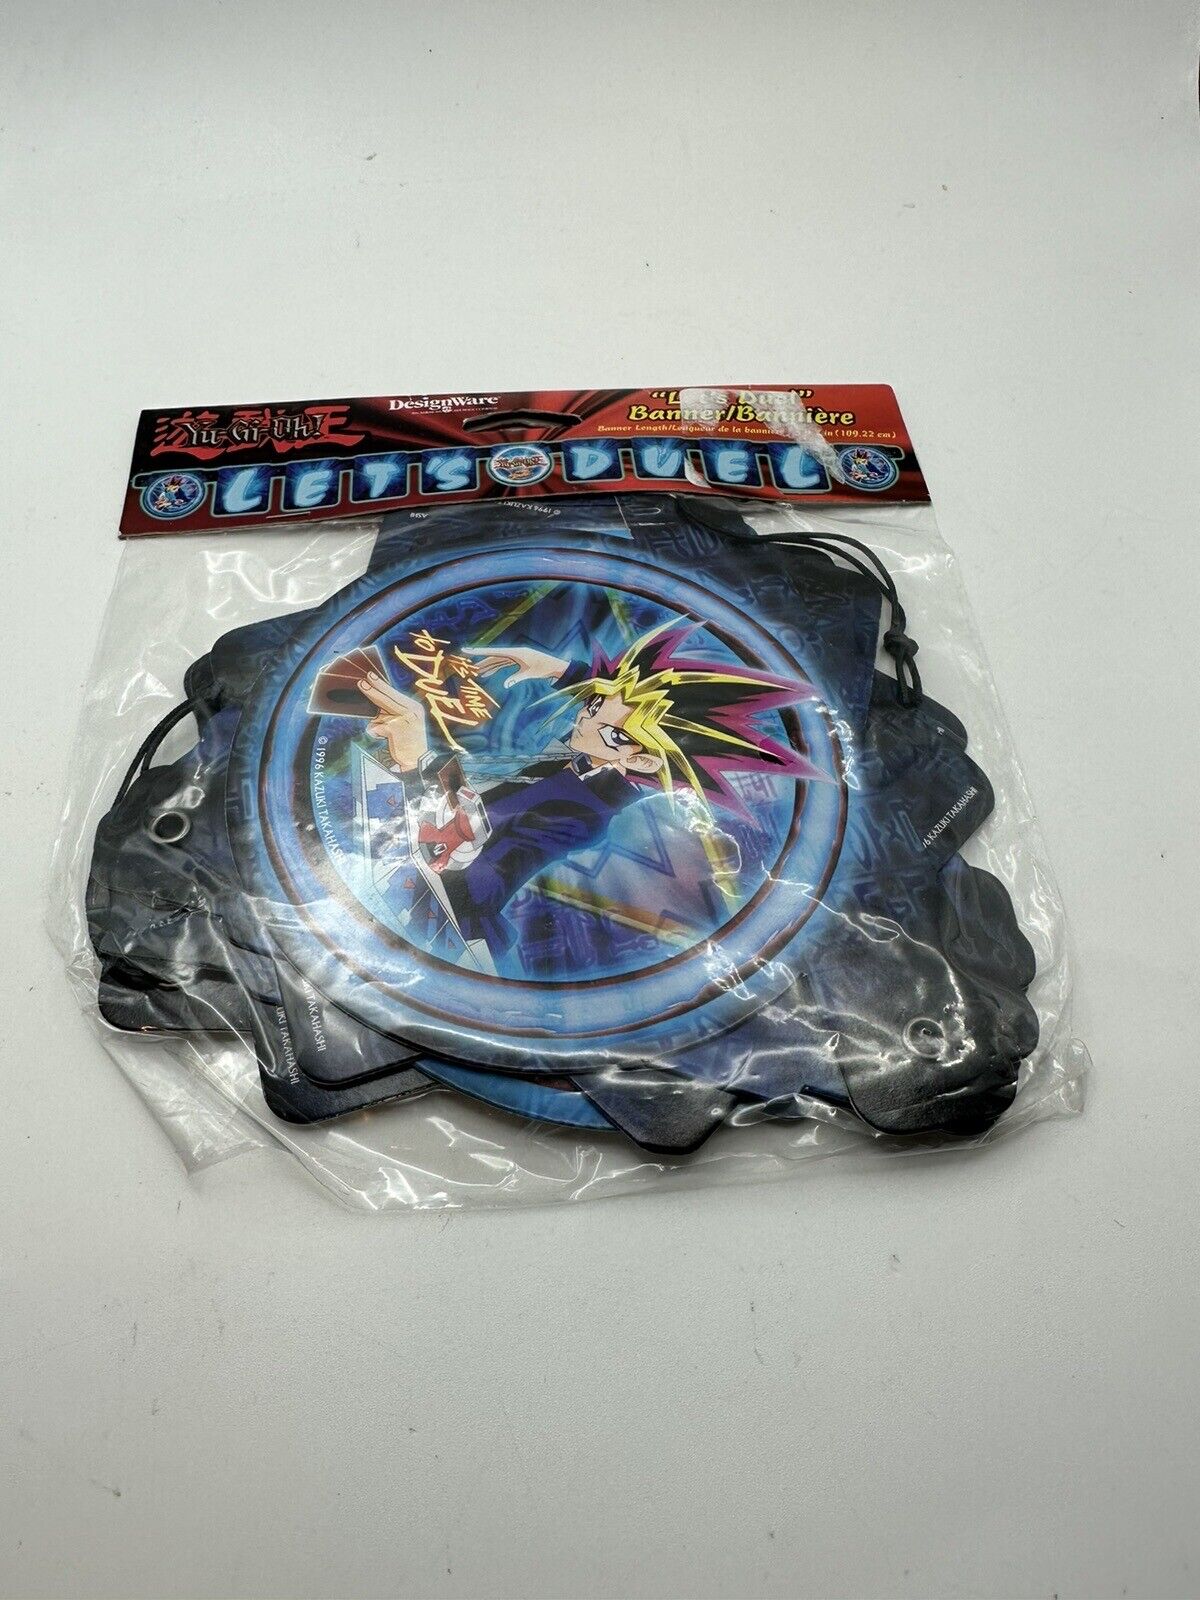 Yu-Gi-Oh Let\'s Duel Banner 1996. New NOS. Sealed Package. Party Room Decoration